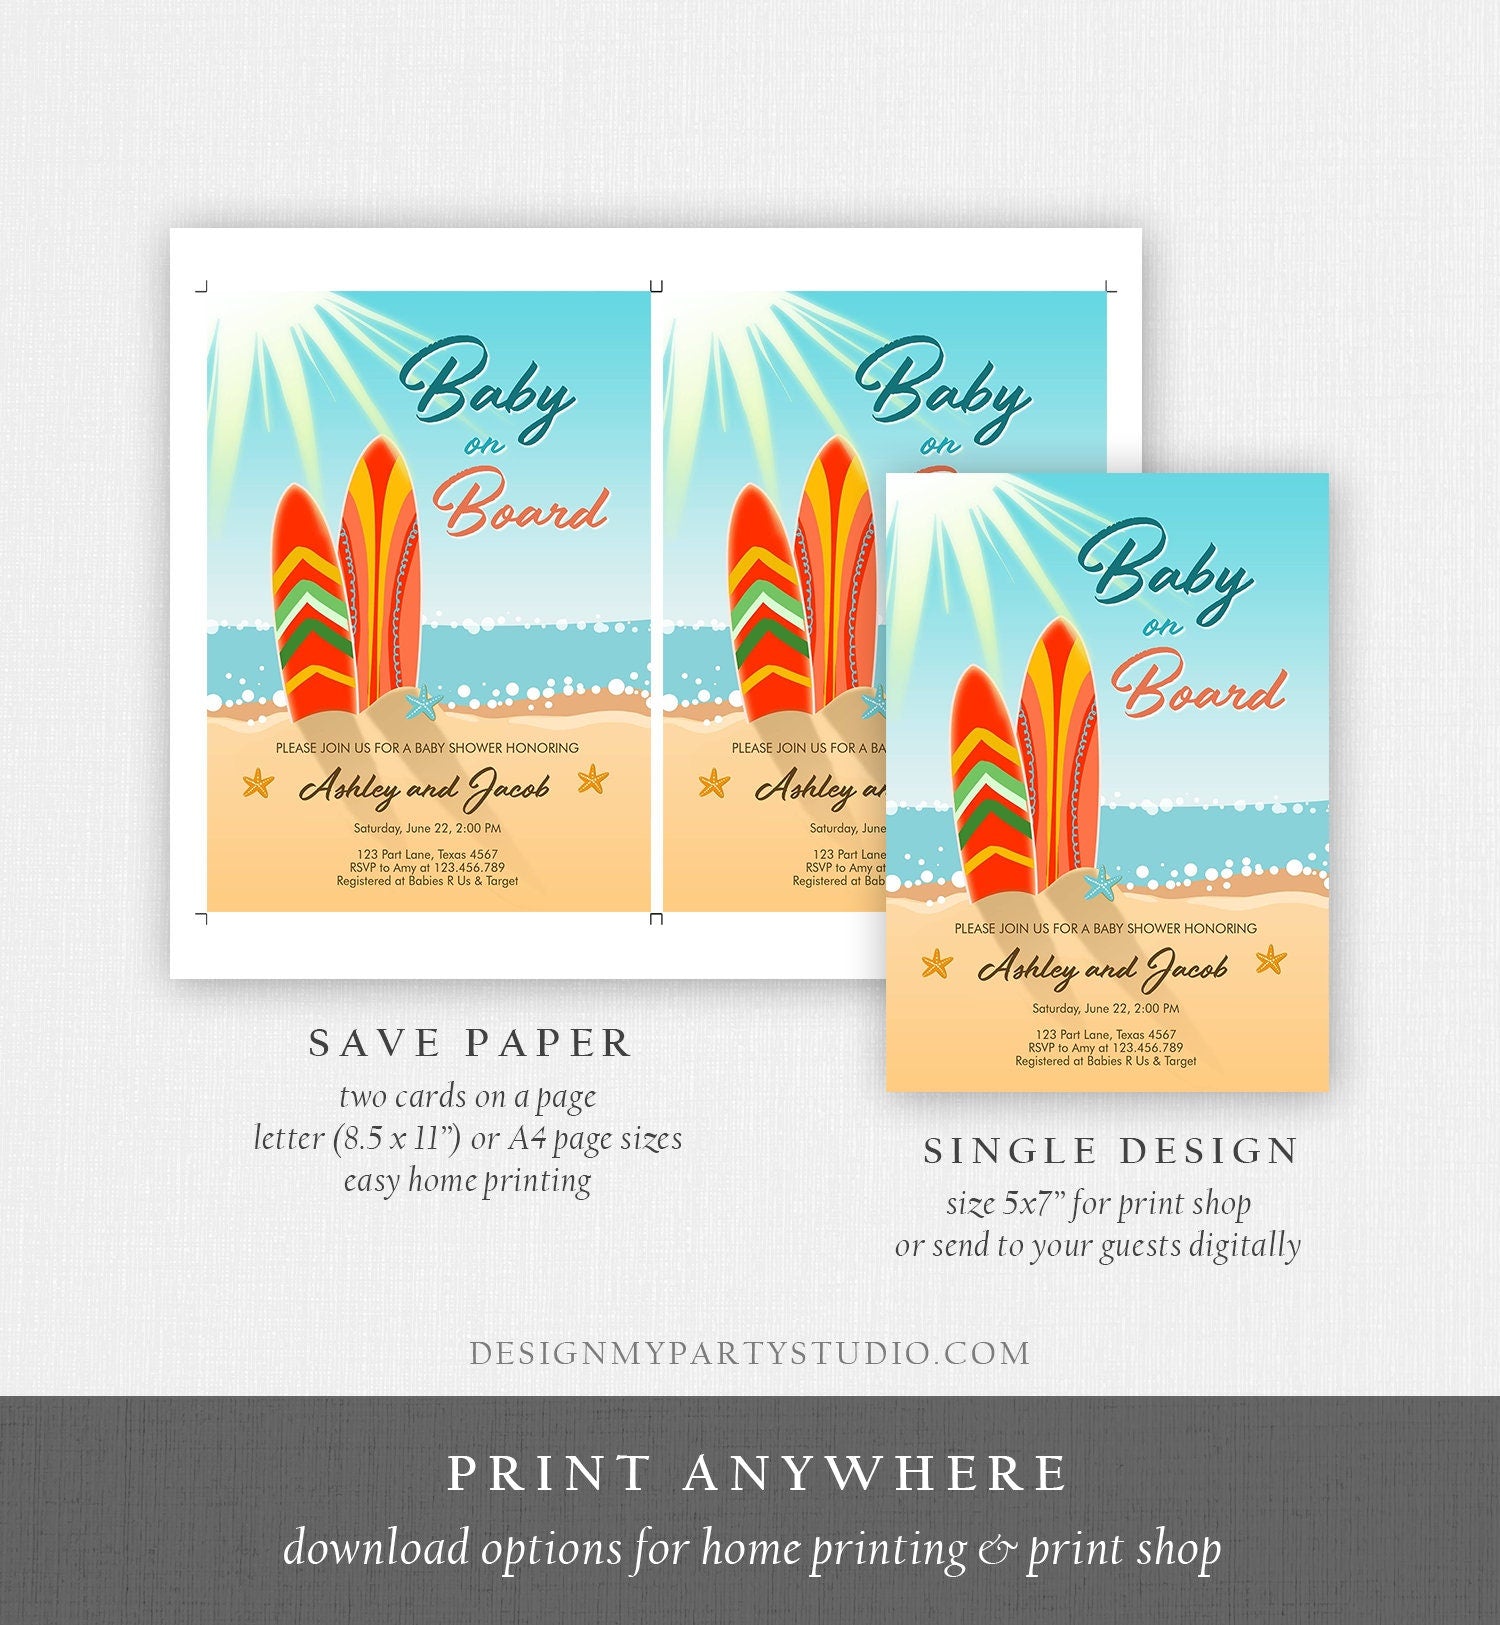 Save on Beach, Baby Shower, Party Supplies